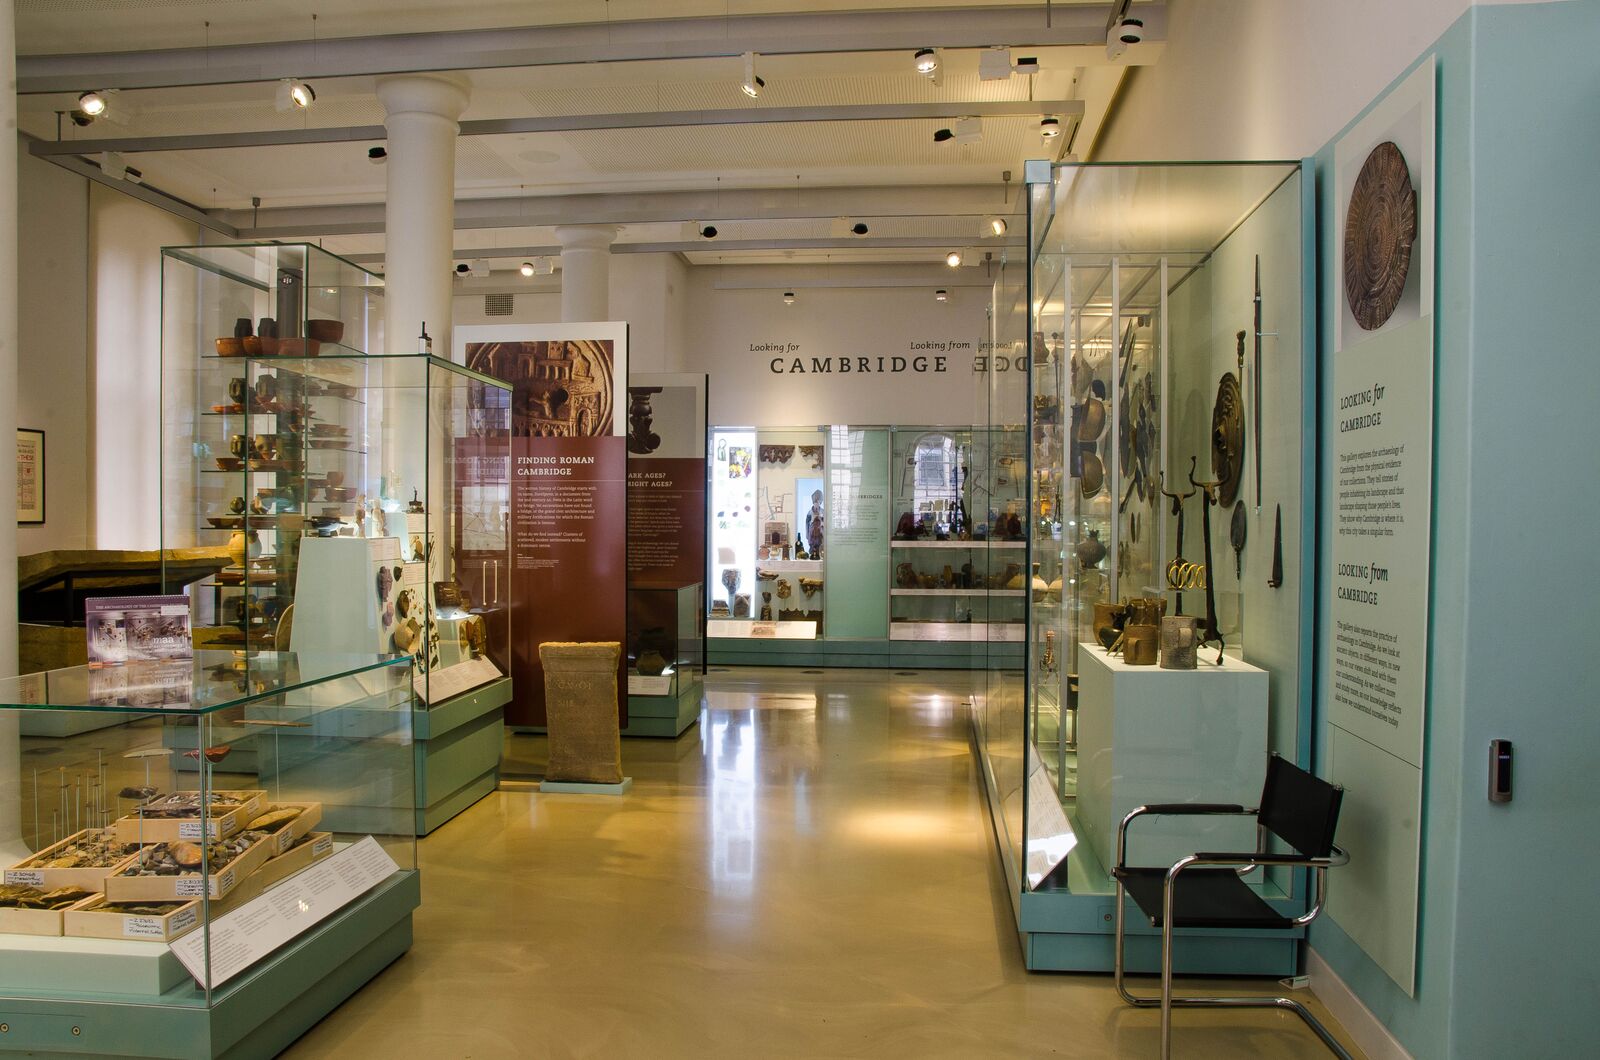 A view of the Clarke Gallery